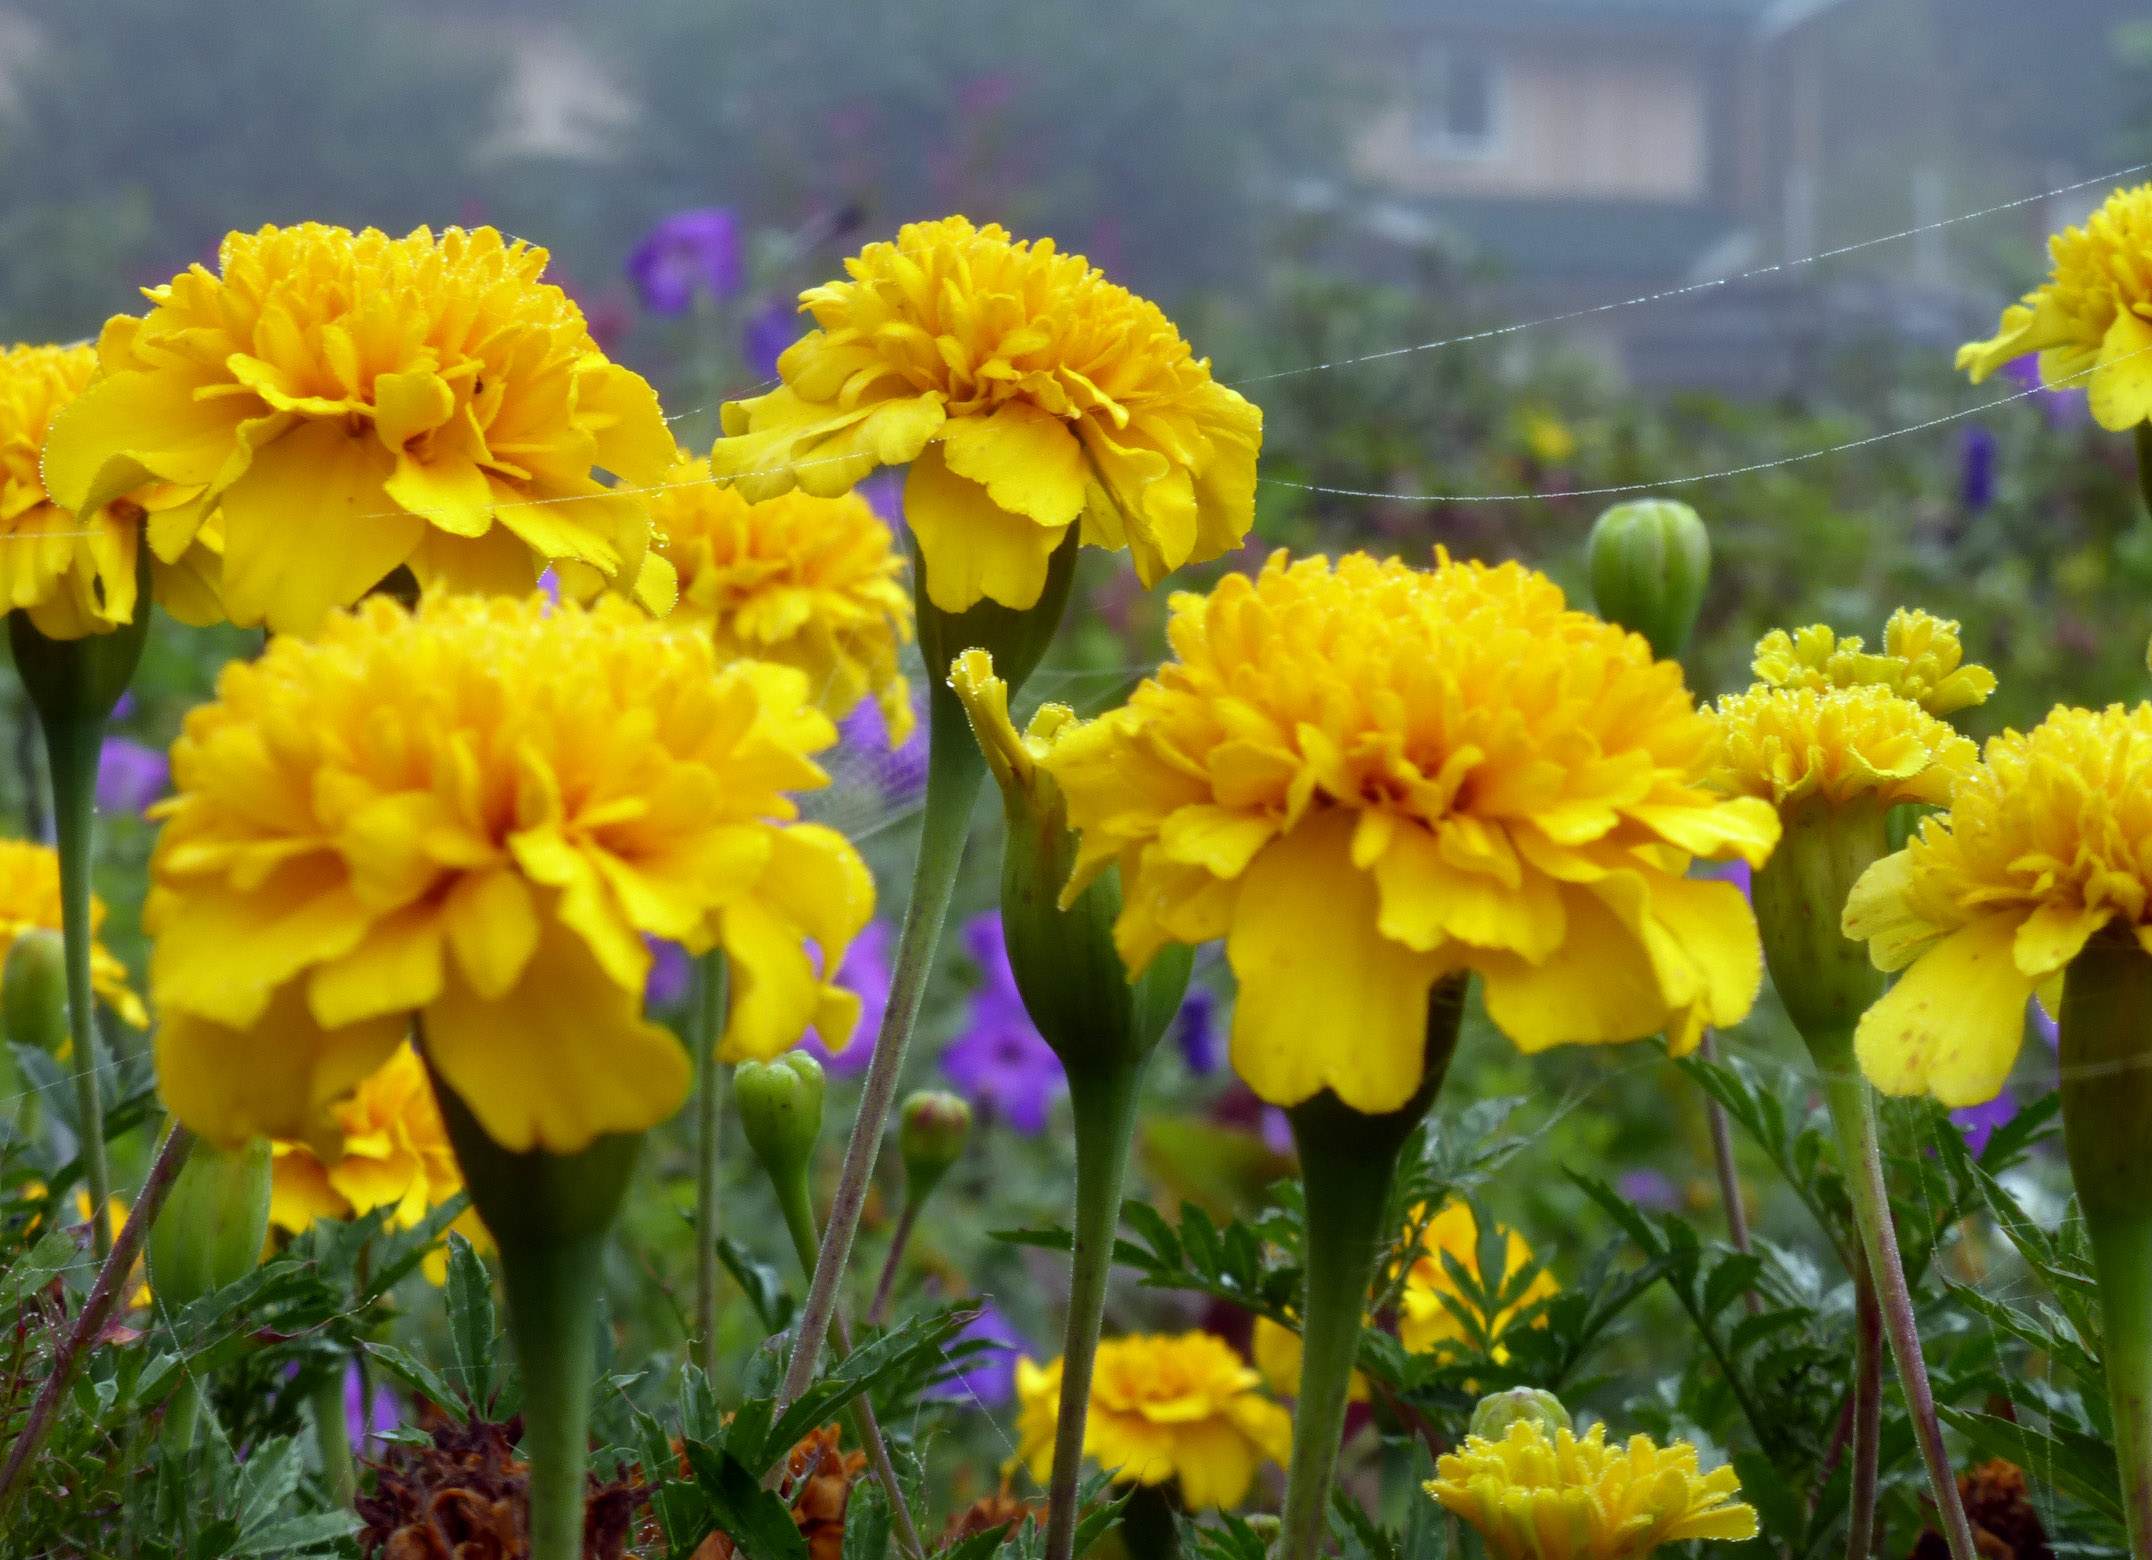 Grow Your Own Sunshine With These Golden Yellow Blooms